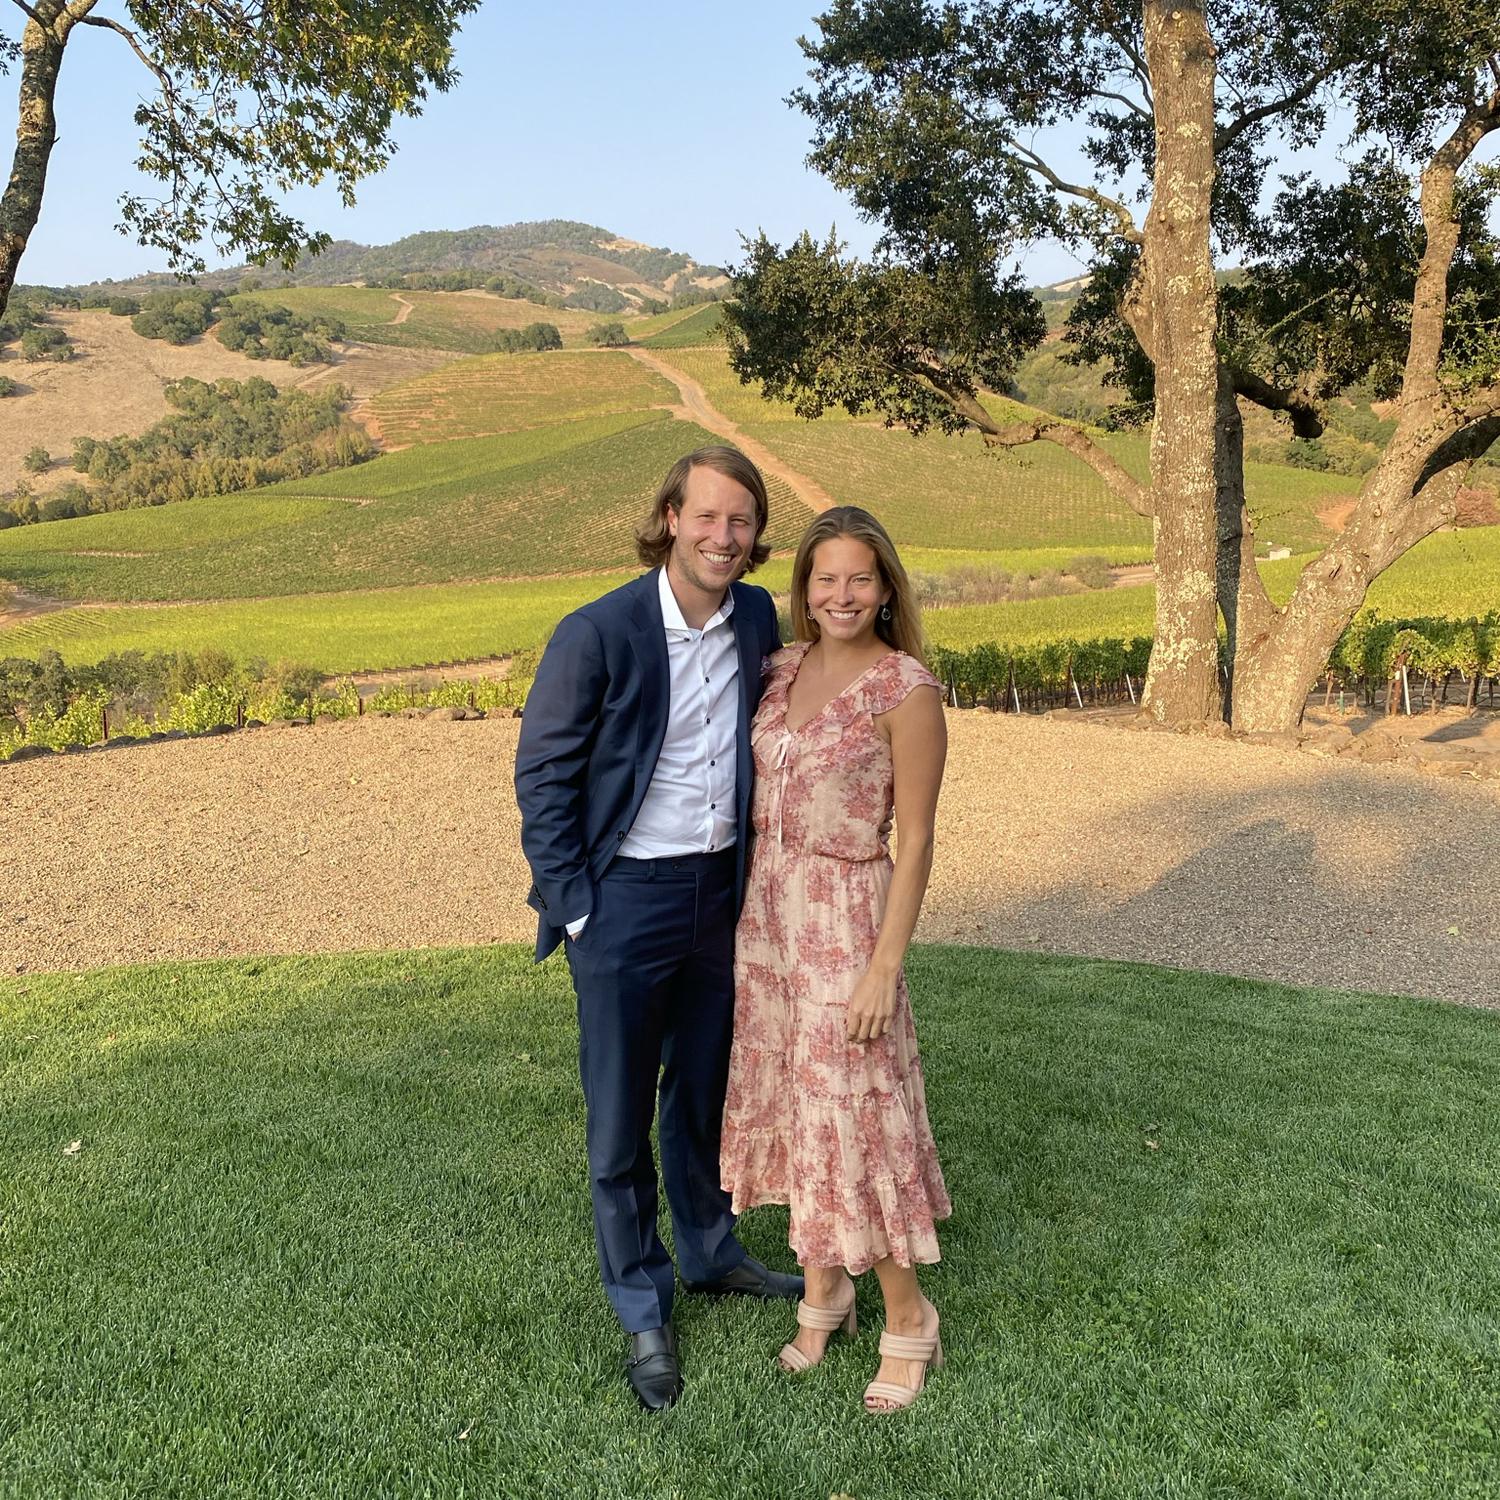 September 2021 - Claire and Victor's wedding in Sonoma